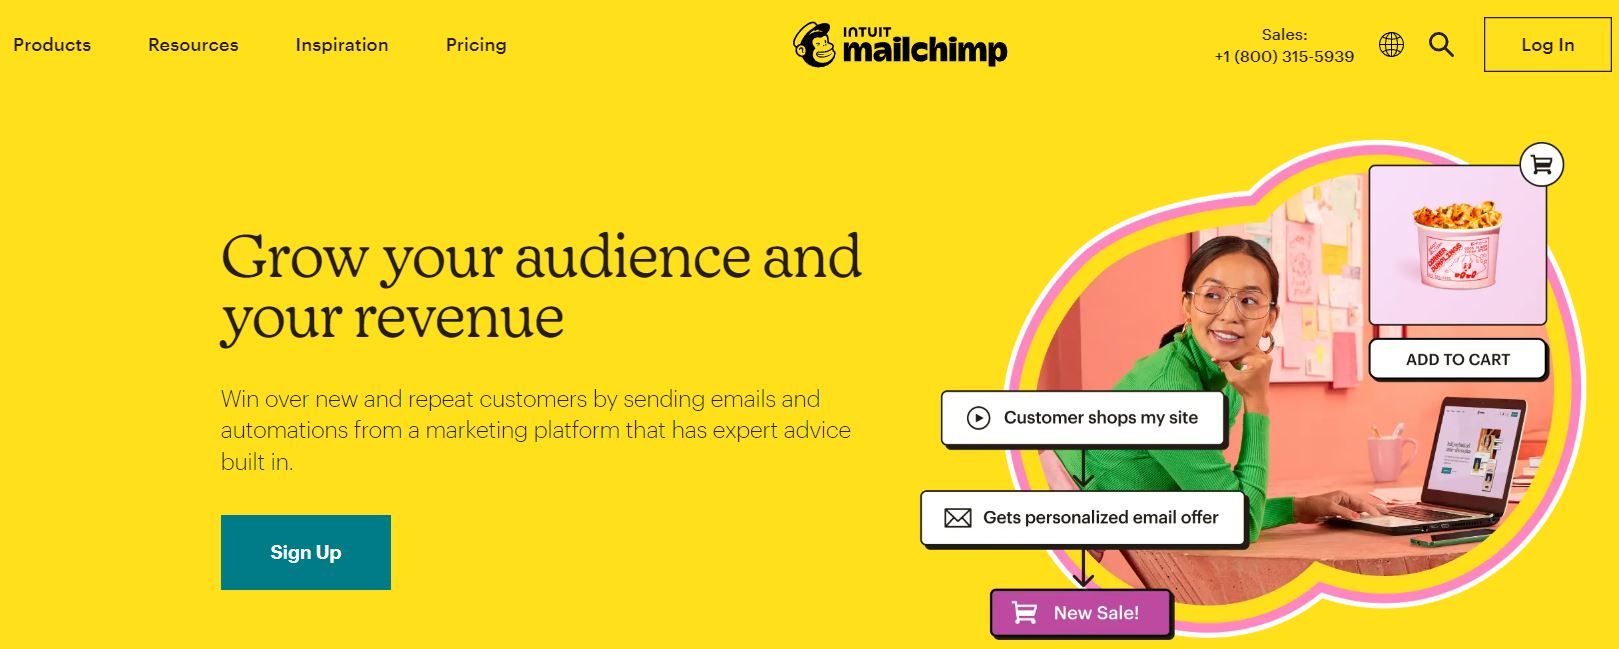 Mailchimp is an email marketing tool used to boost email conversion rates